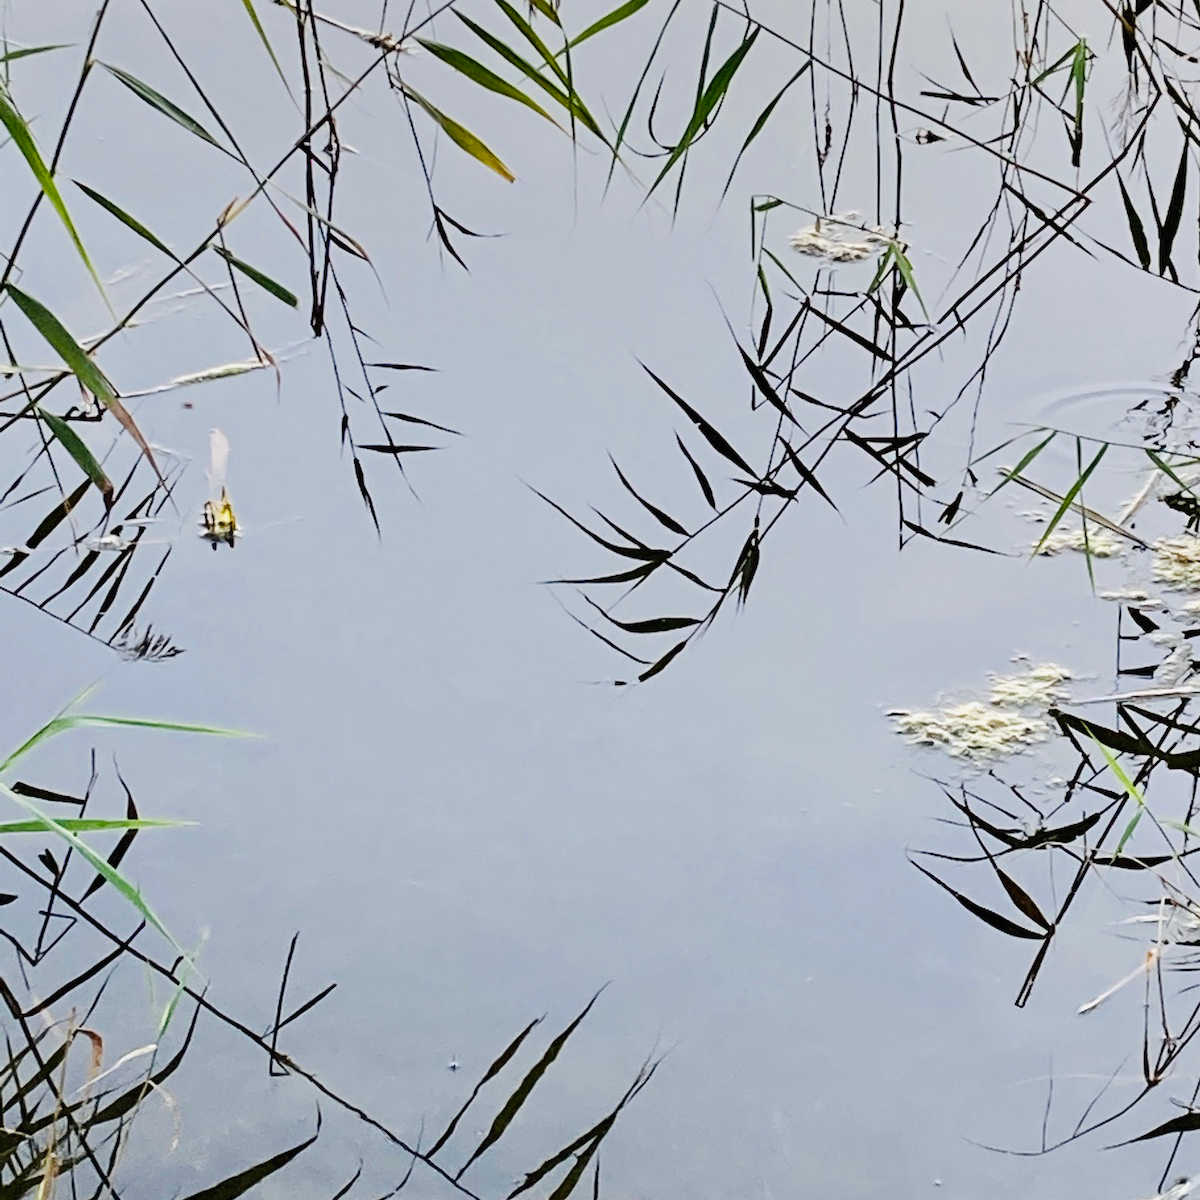 Water surface and a bed of reeds